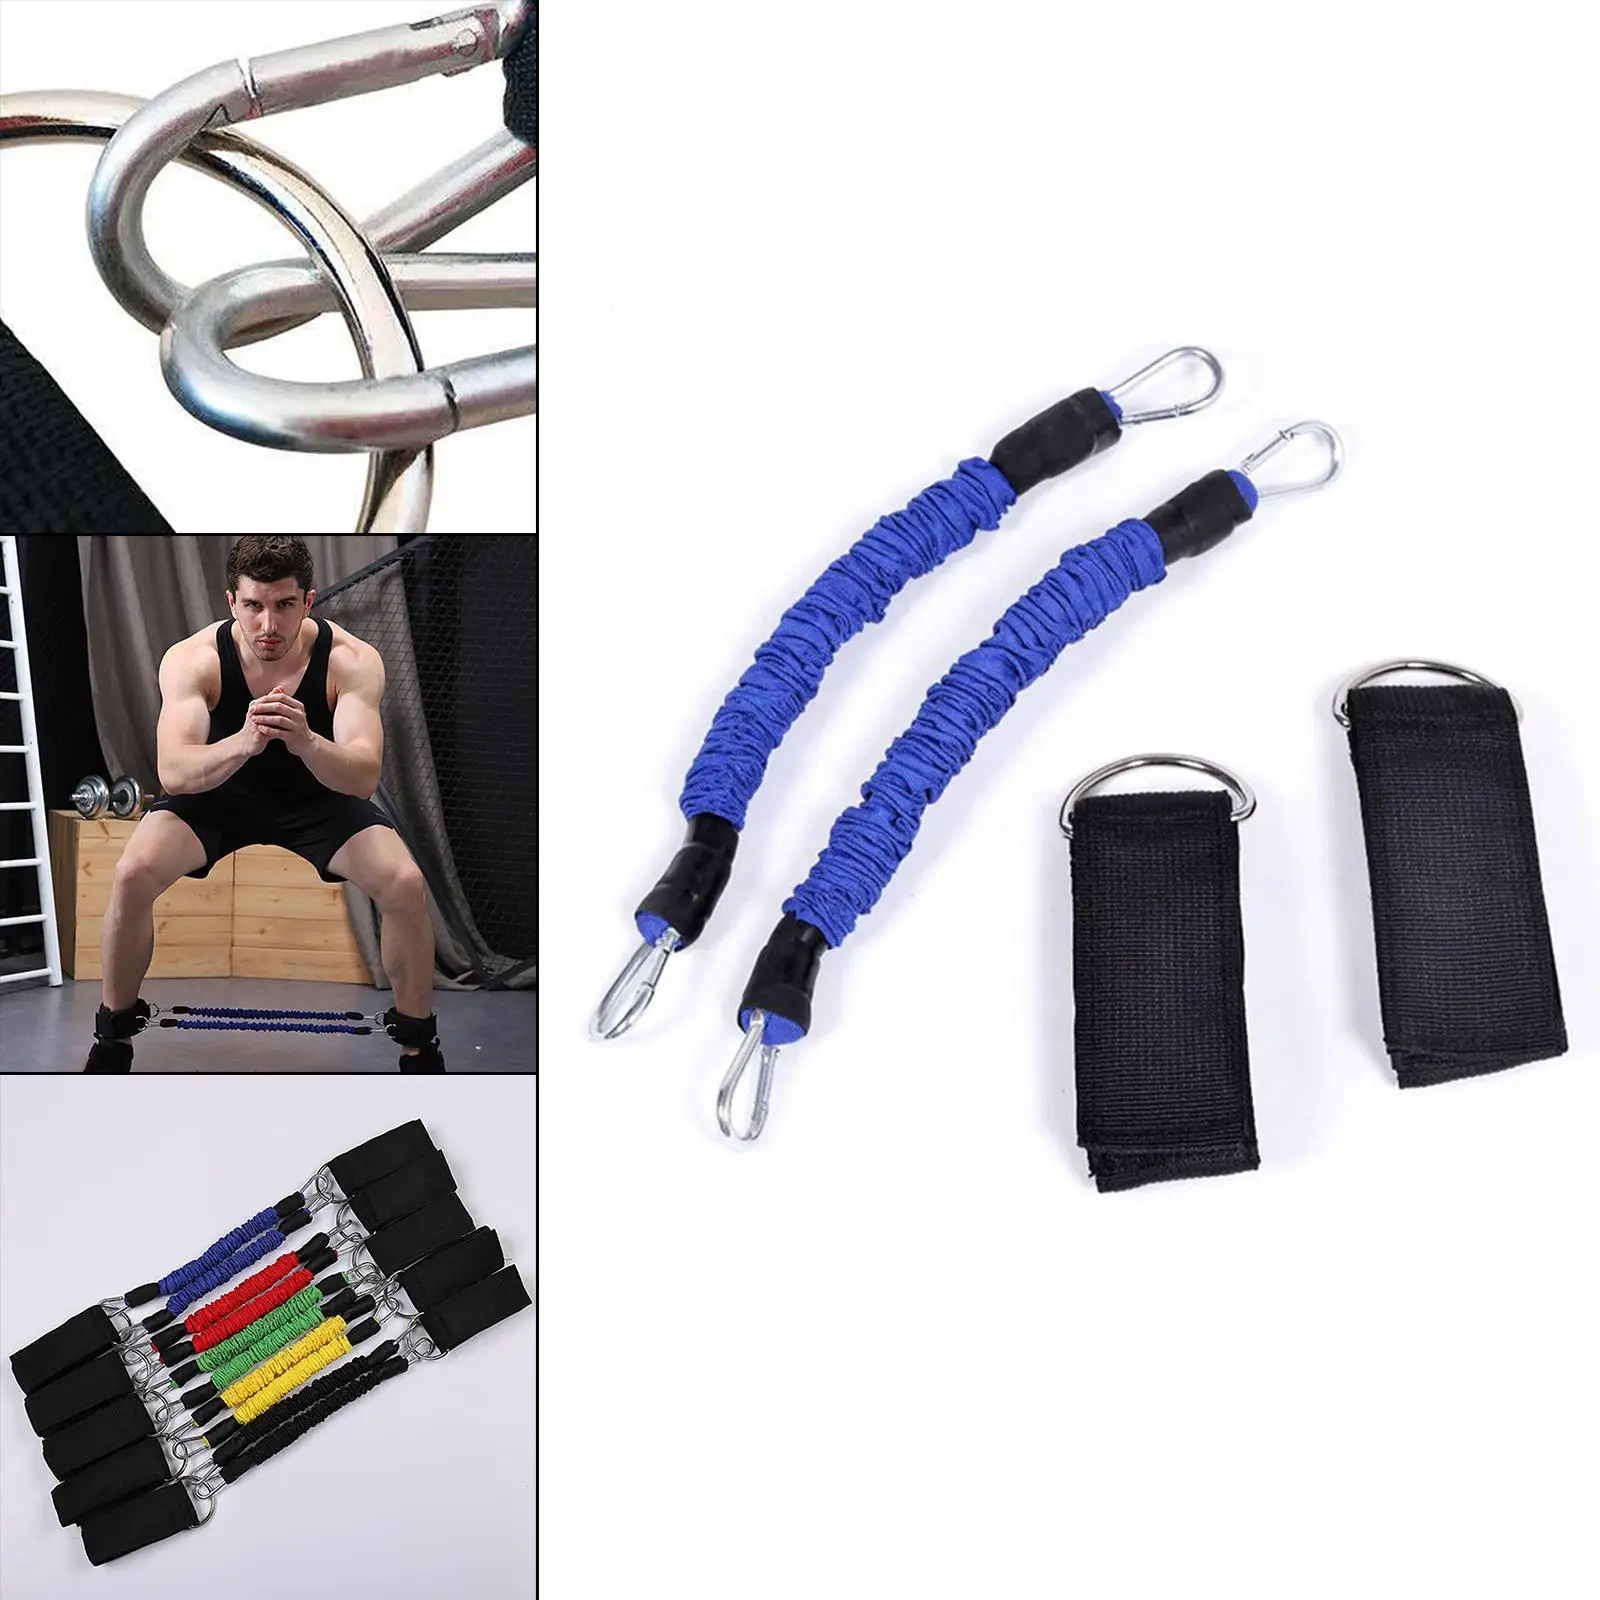 Thigh Bands Yoga Training for Speed Training with Ankle Straps Speed and Strength Bands for Legs Ankle Bands for Working Out